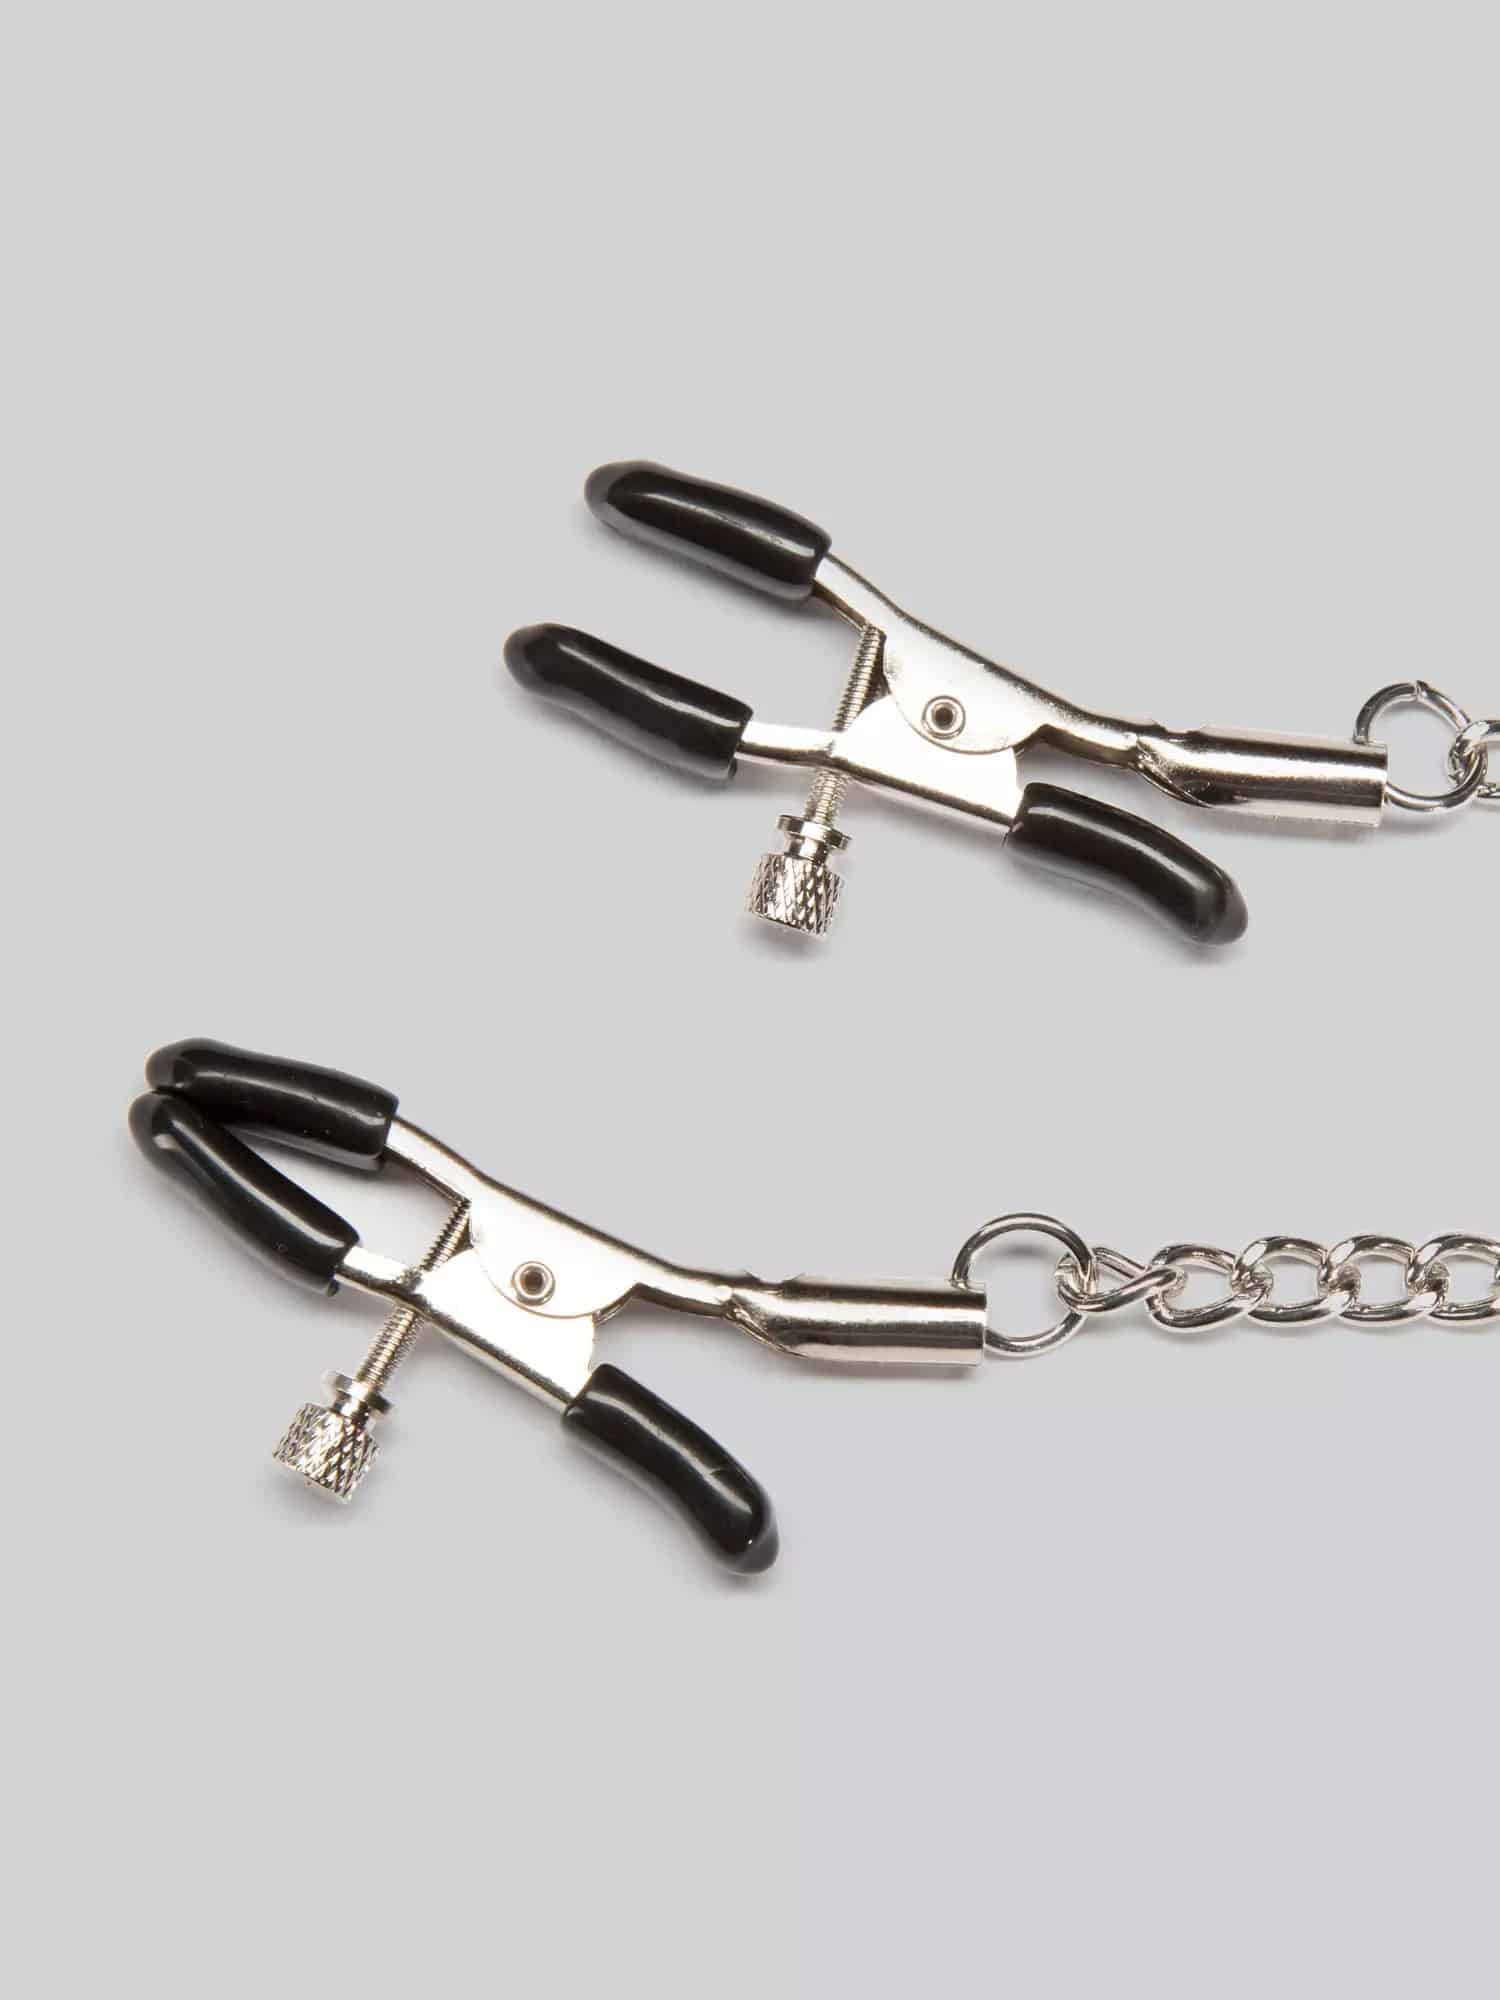 Bondage Boutique Adjustable Nipple Clamps and Clit Clamp. Slide 5